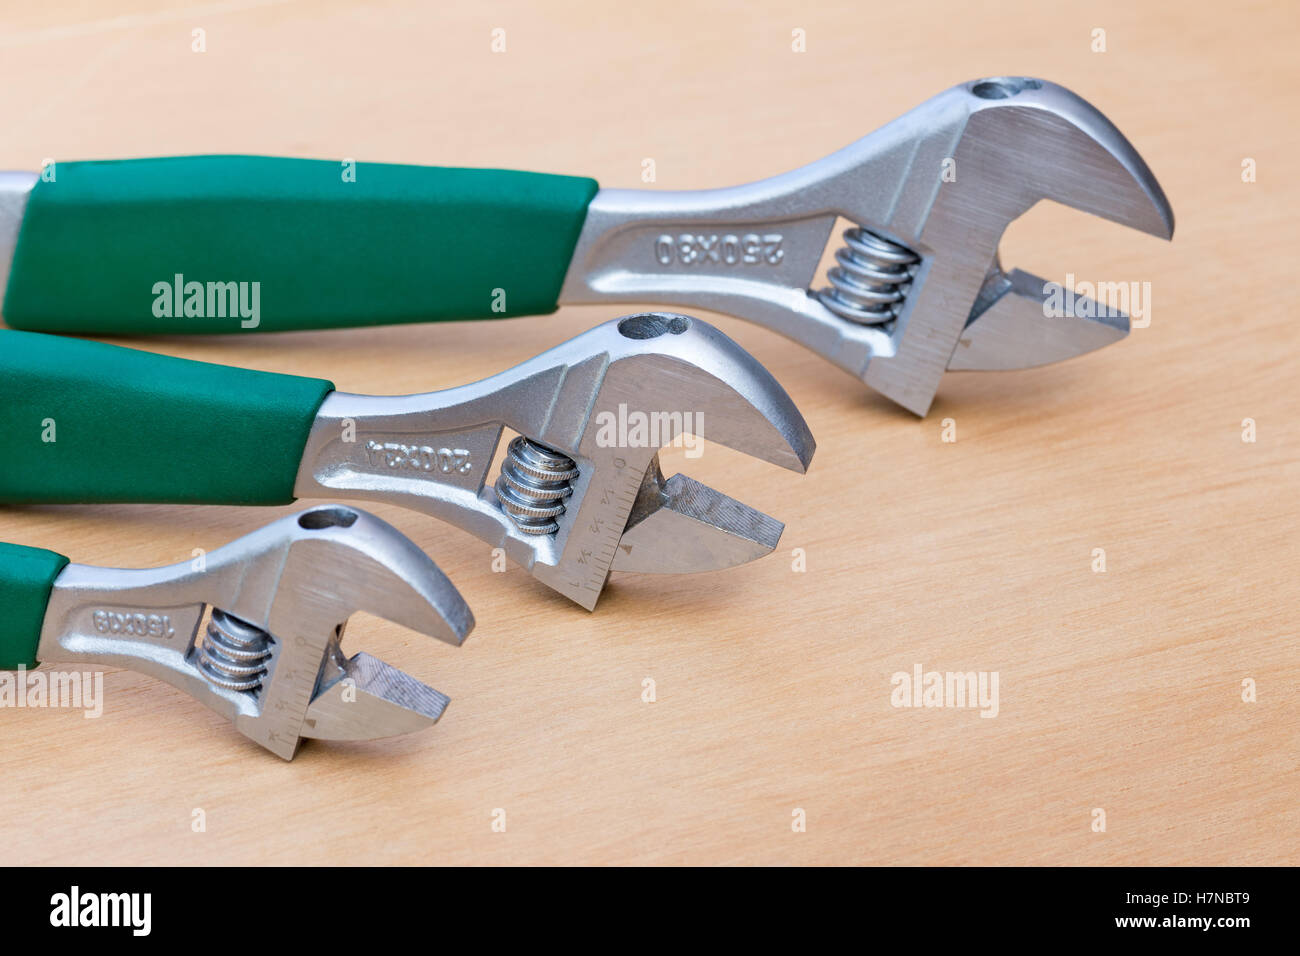 Three adjustable wrenches of different size standing upright on wood Stock Photo